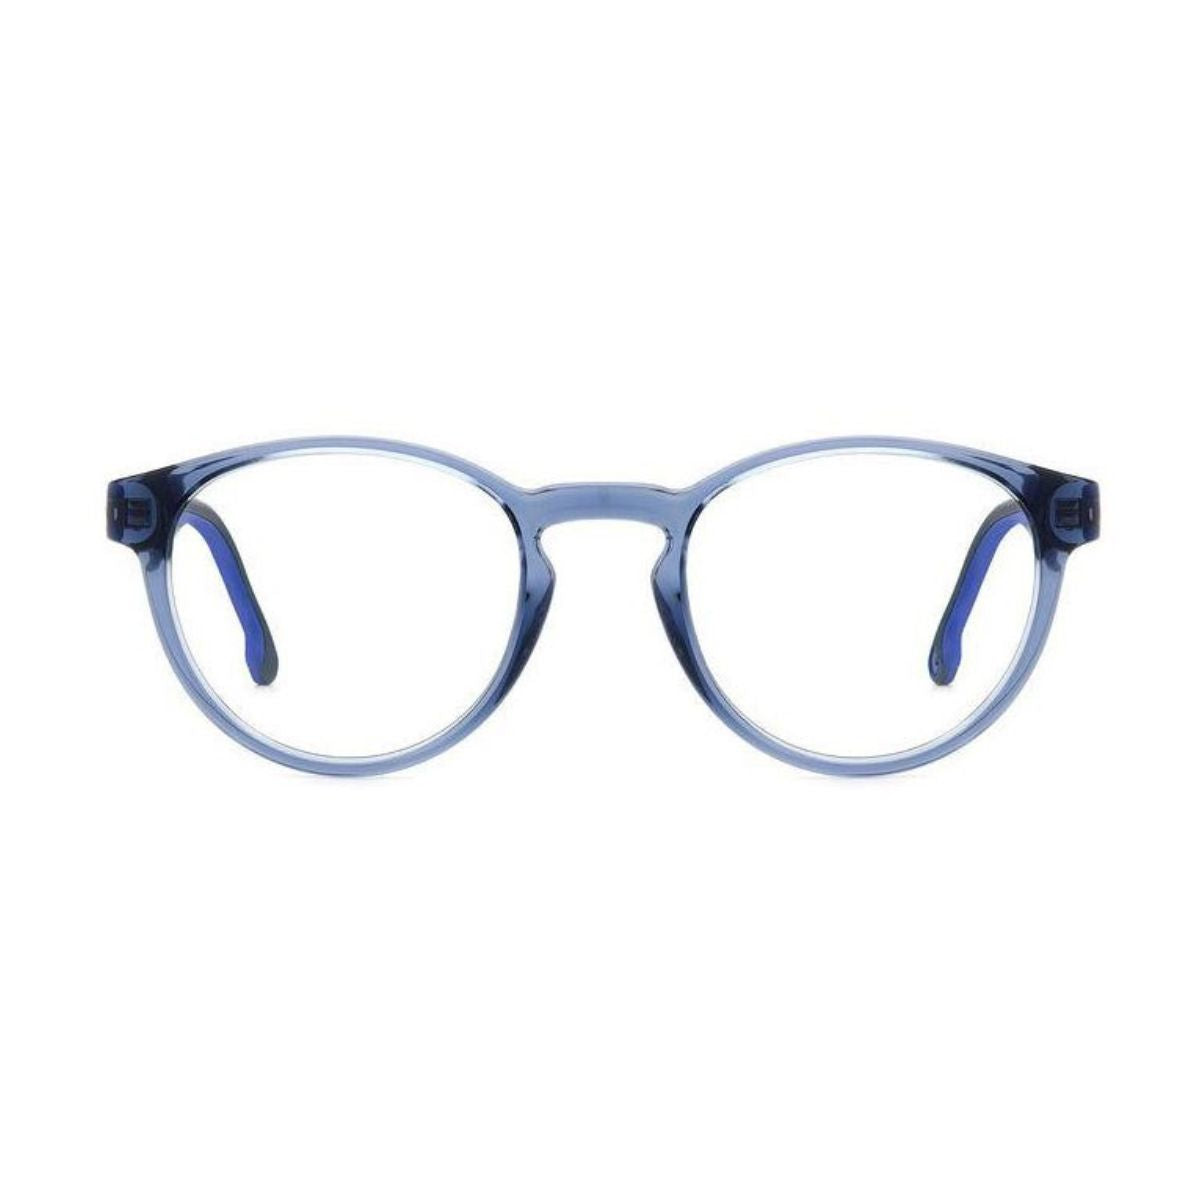 " Carrera CAPRW 4/IN PJP spectacle frame for men's and women's online at optorium"